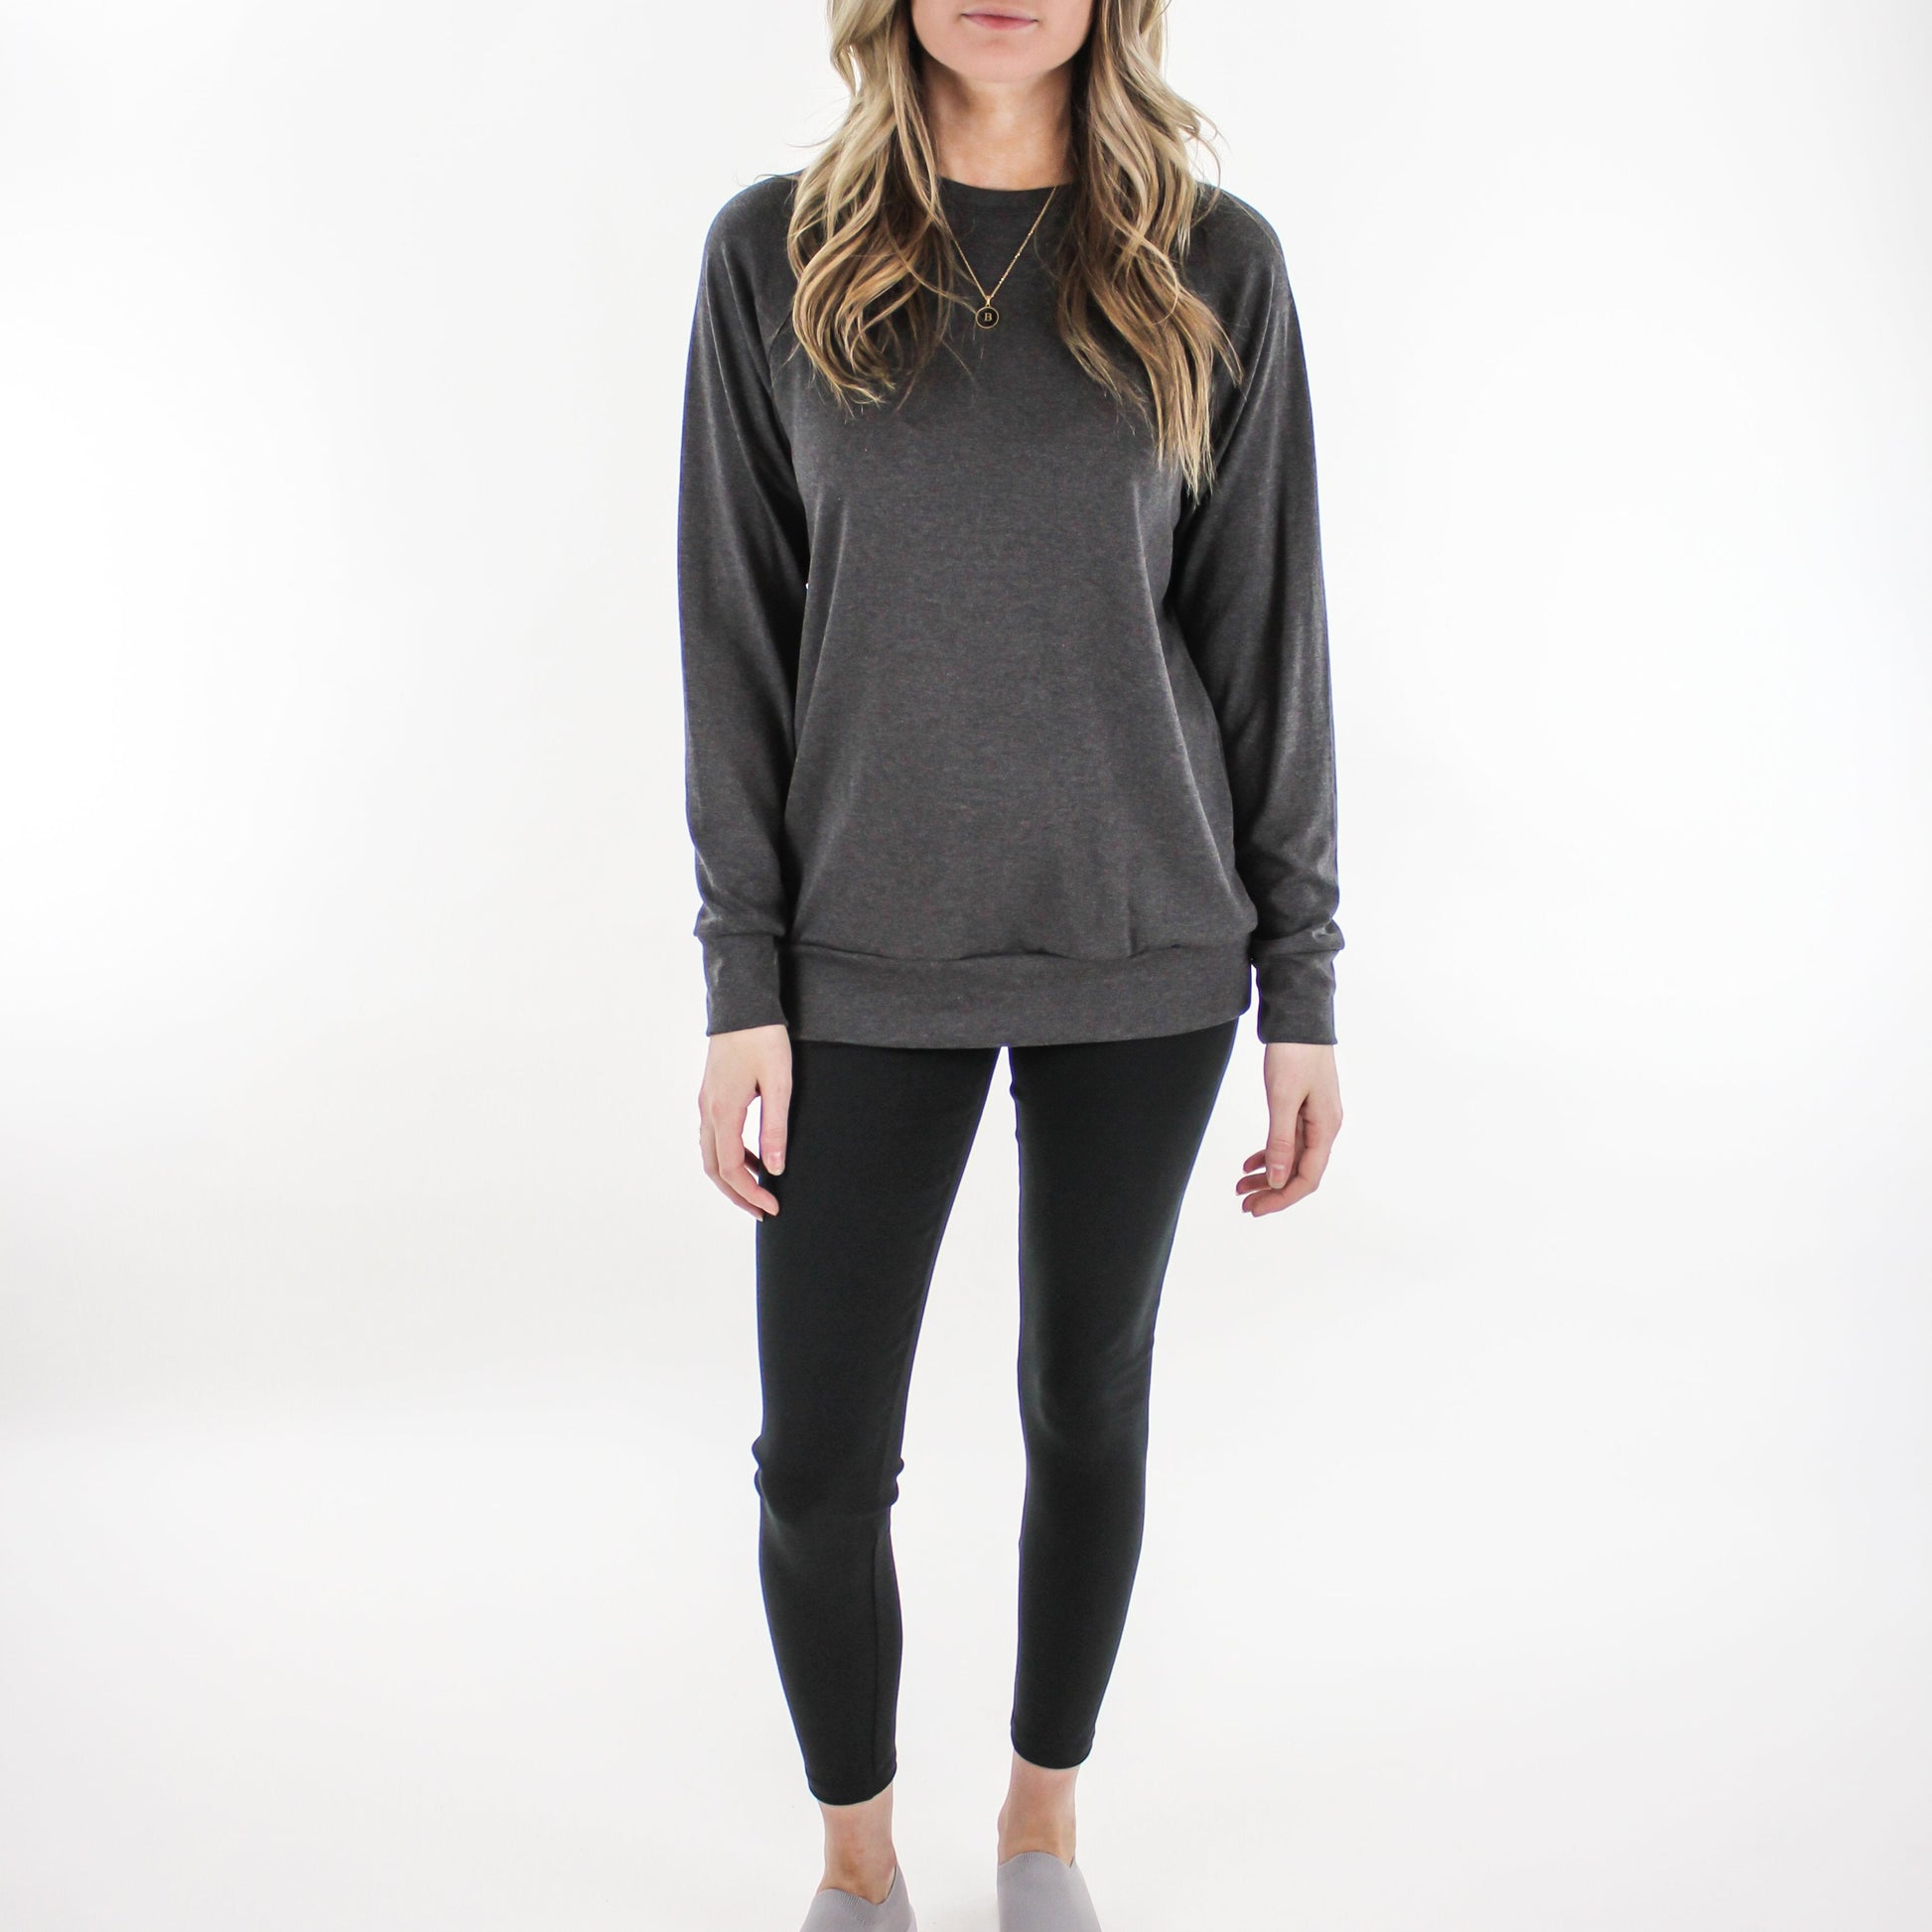 Adult Unisex Bamboo Pullover | Charcoal